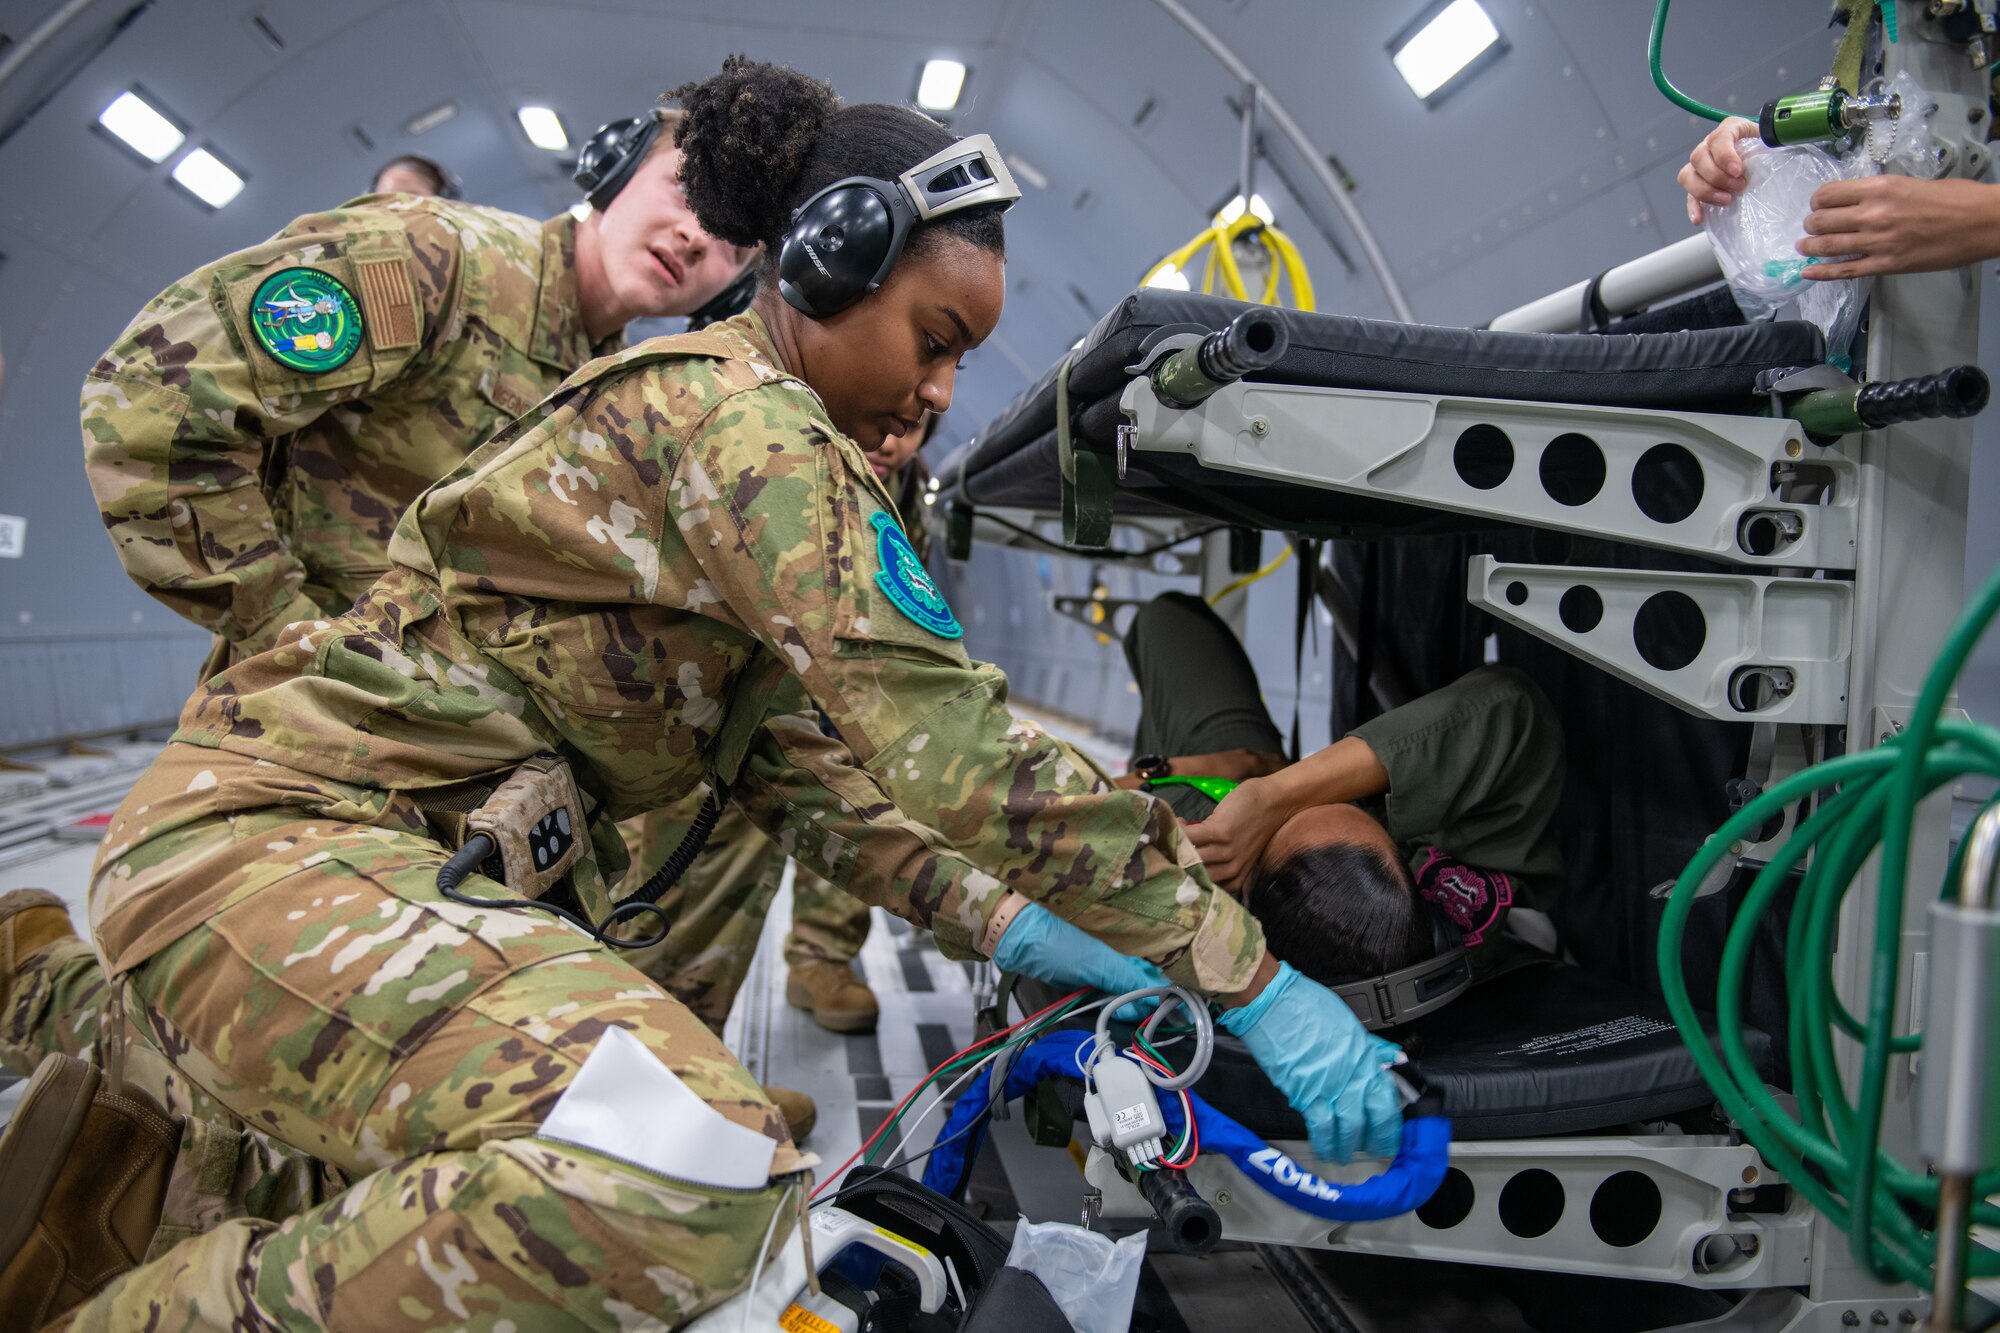 Staff Sgt. Jaylin Henderson, 18th Aeromedical Evacuation Squadron charge medical technician, collects a set of vitals from Master Sgt. Rihanna Scott, 18th AES aeromedical evacuation technician, during a simulated medical evacuation Oct. 14, 2022, based out of Kadena Air Base, Japan.